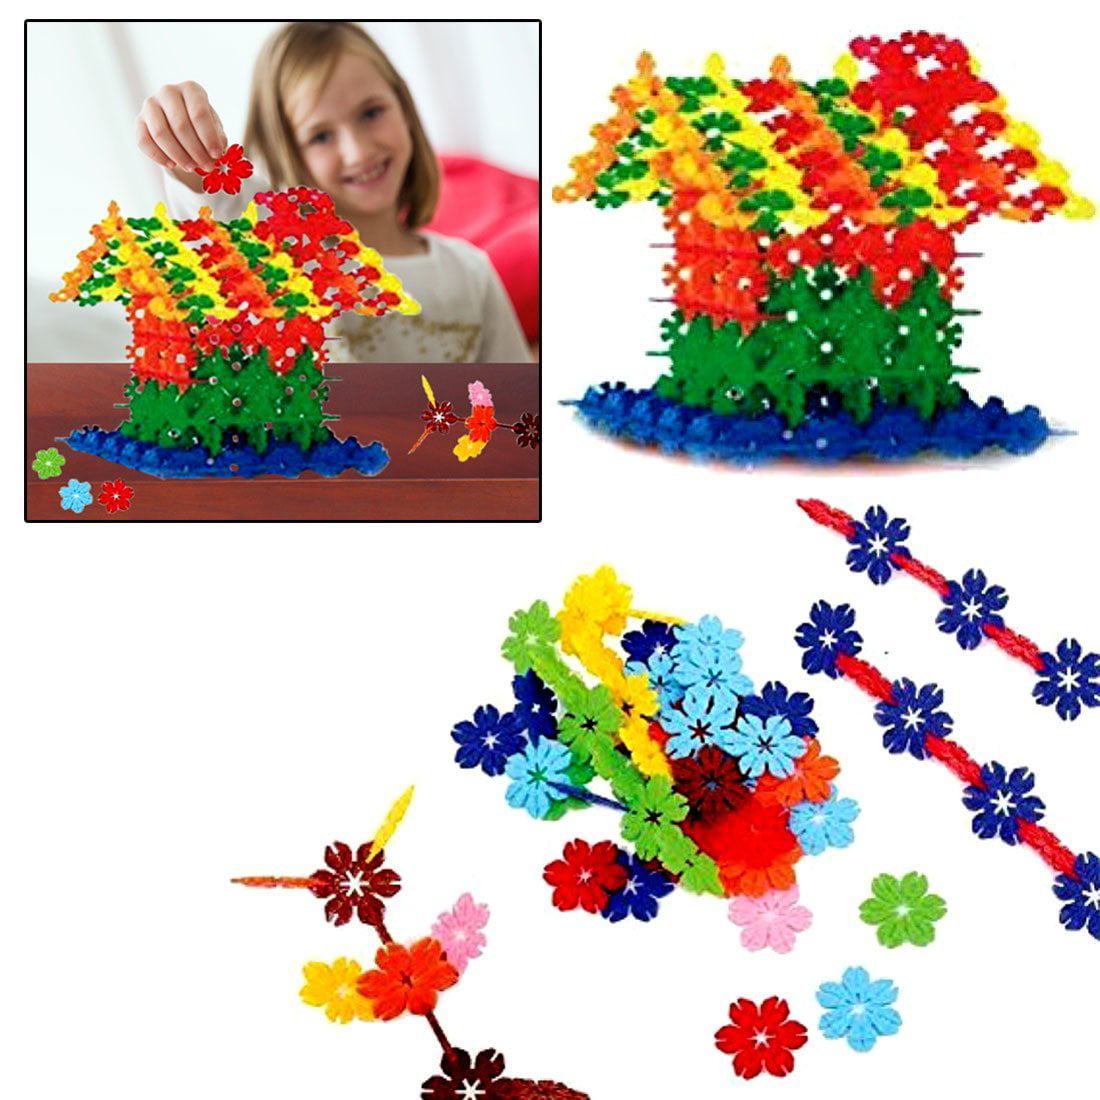 Snowflakes Connect Engineering Toy Building Learning Educational Toys Creativity 